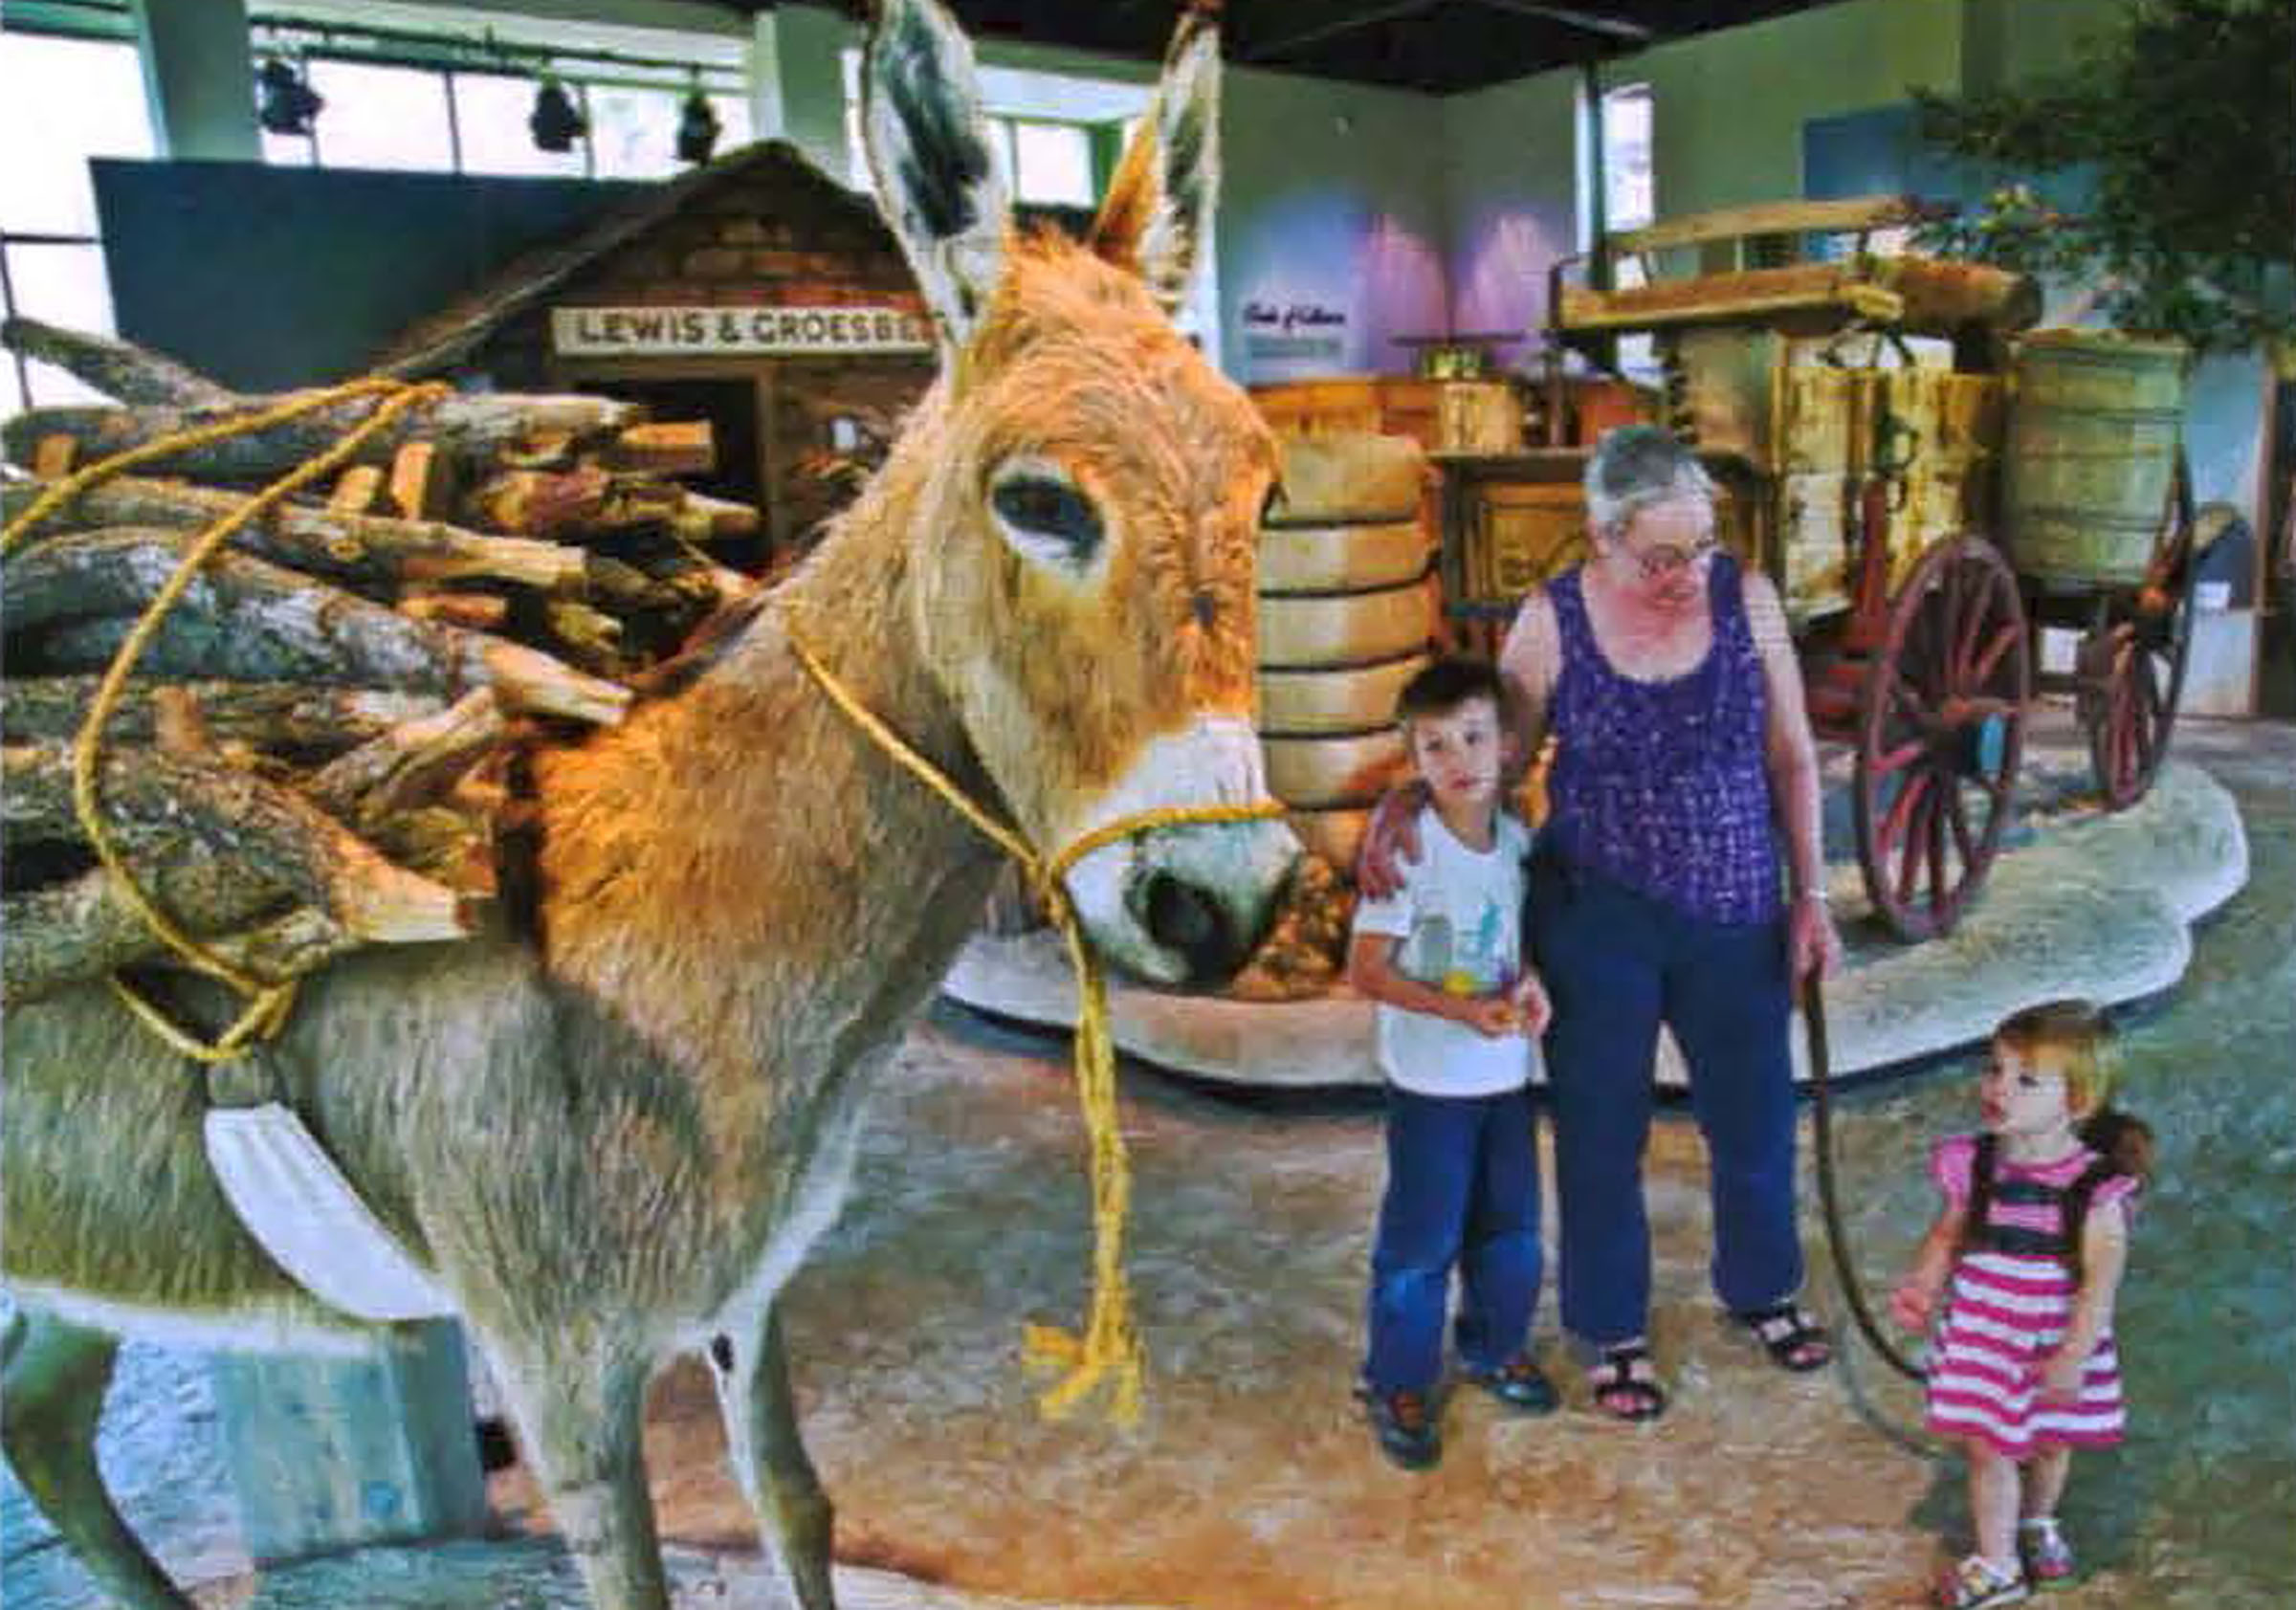 A woman and two children look at exhibit